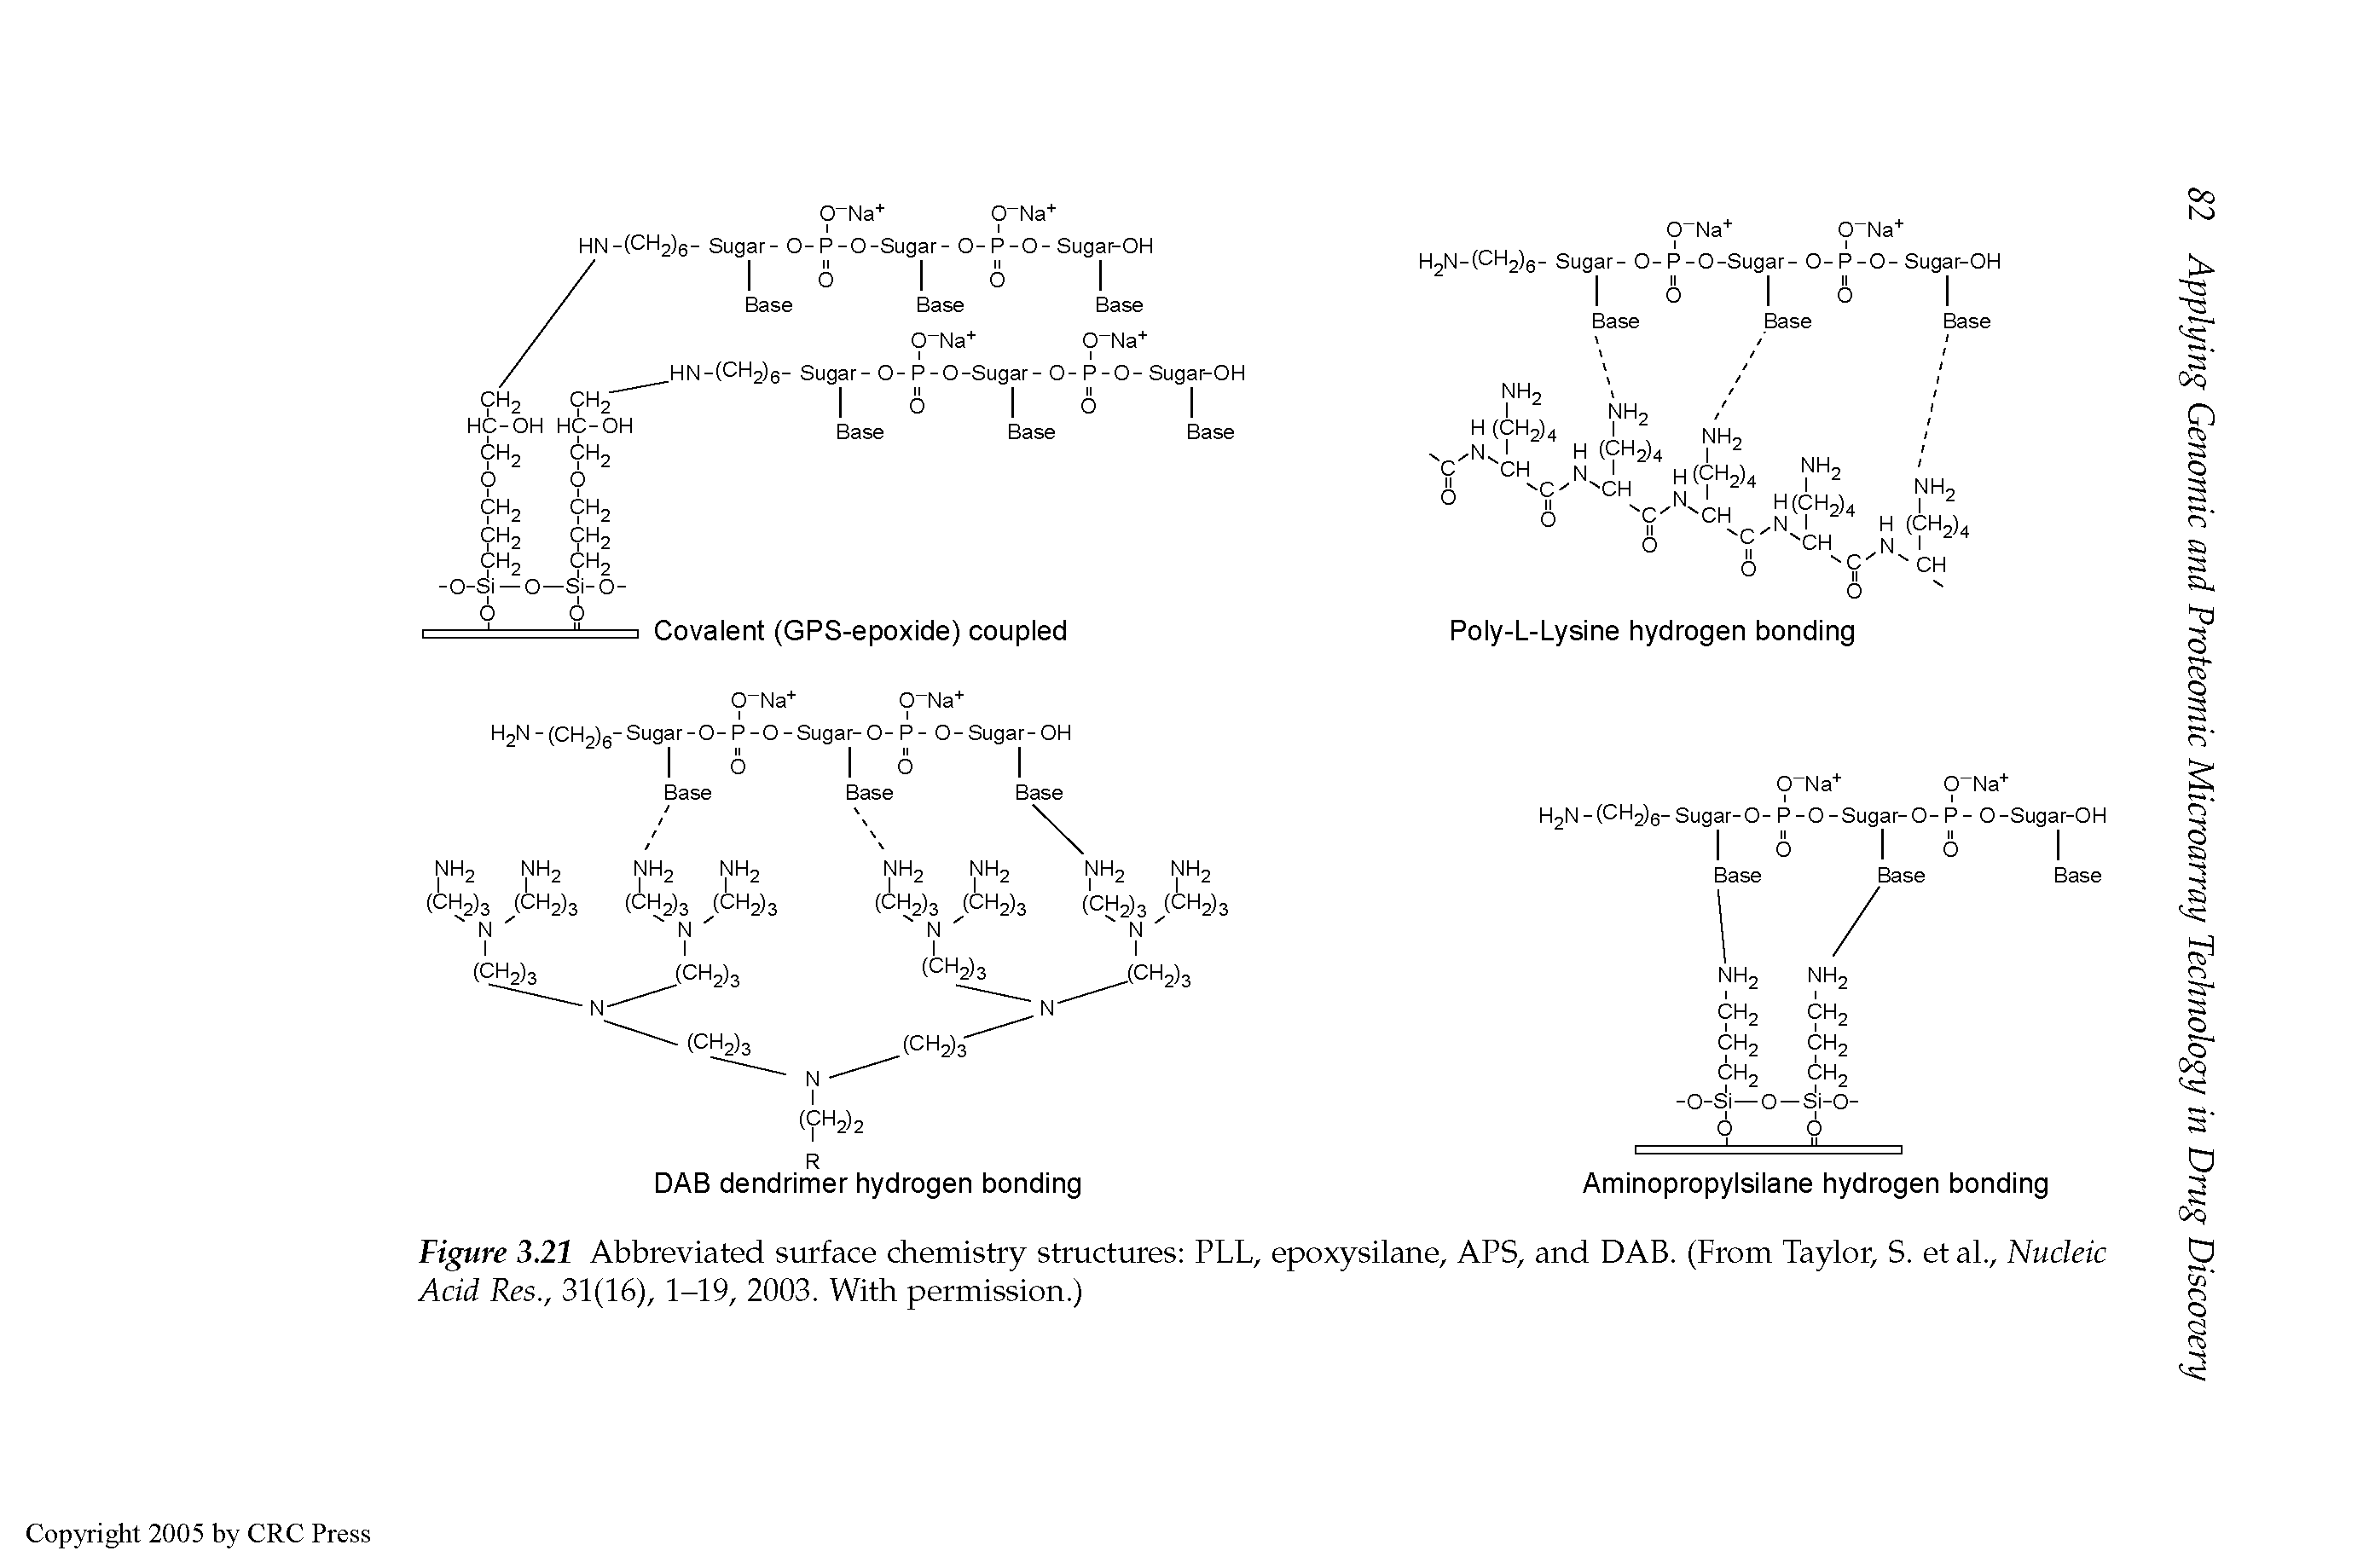 Figure 3.21 Abbreviated surface chemistry structures PLL, epoxysilane, APS, and DAB. (From Taylor, S. et al.. Nucleic Acid Res., 31(16), 1-19, 2003. With permission.)...